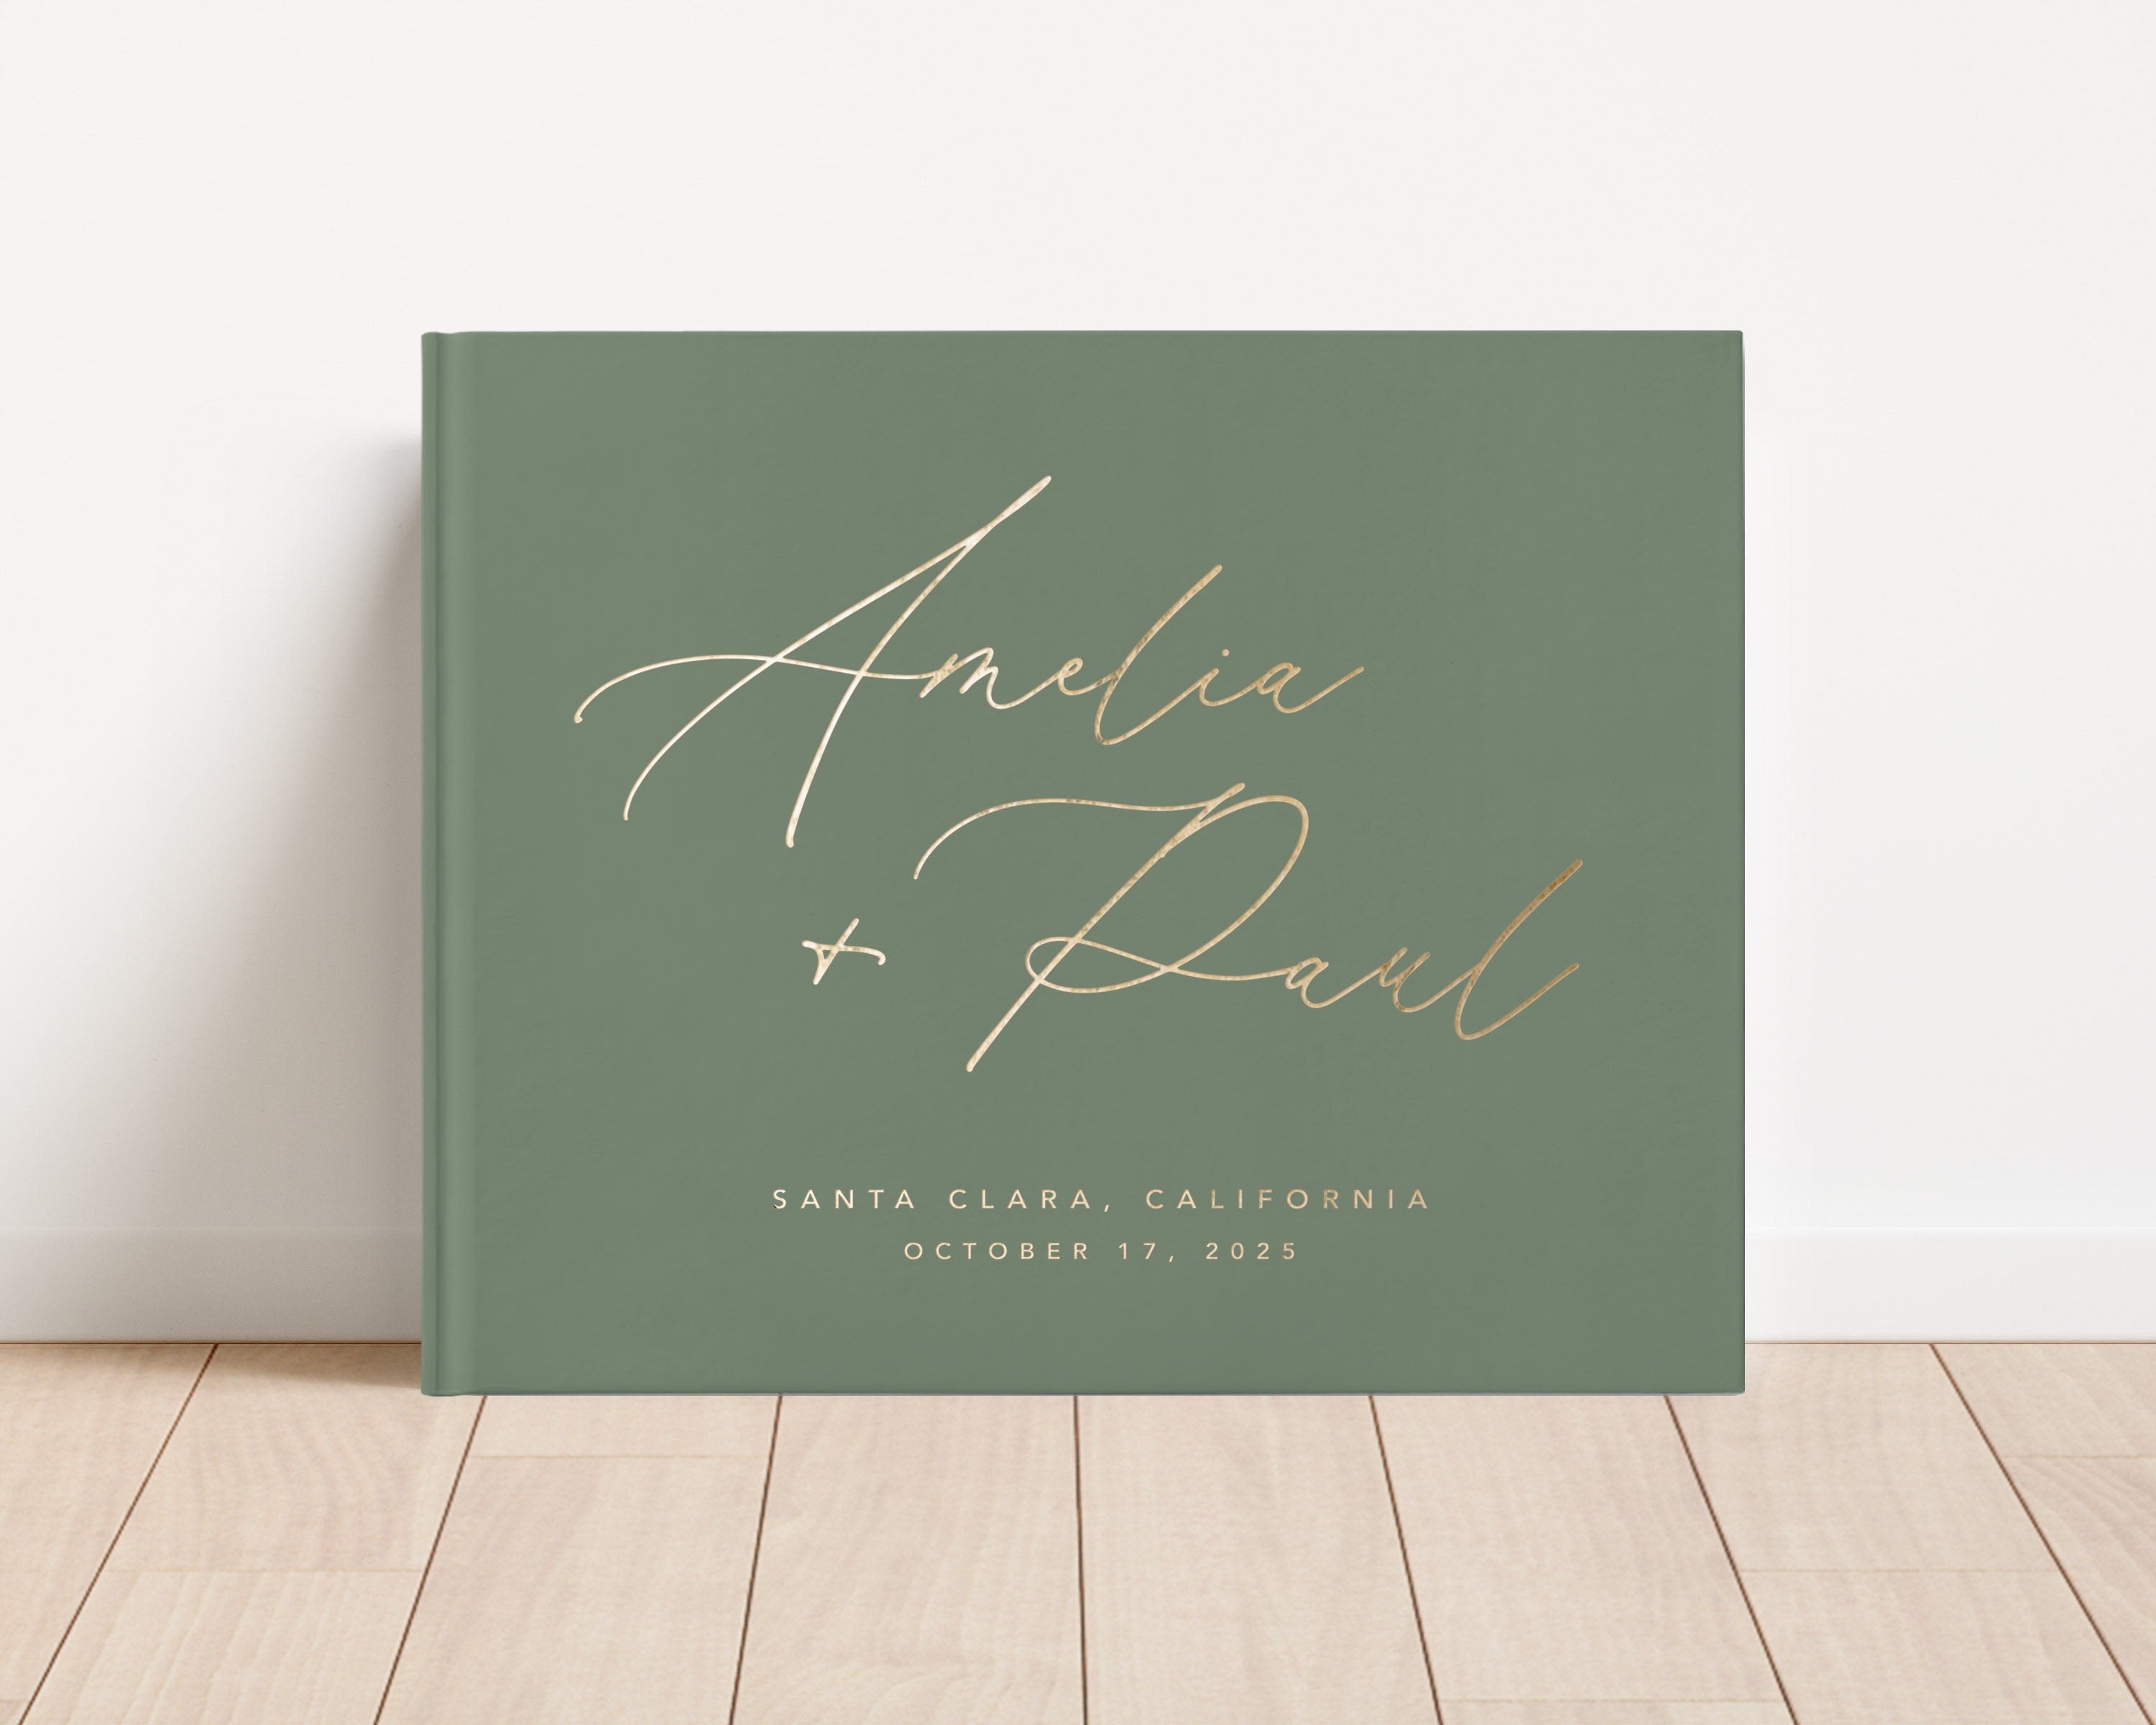 Luxury wedding guest book with custom gold foil text and sage green hardback cover.